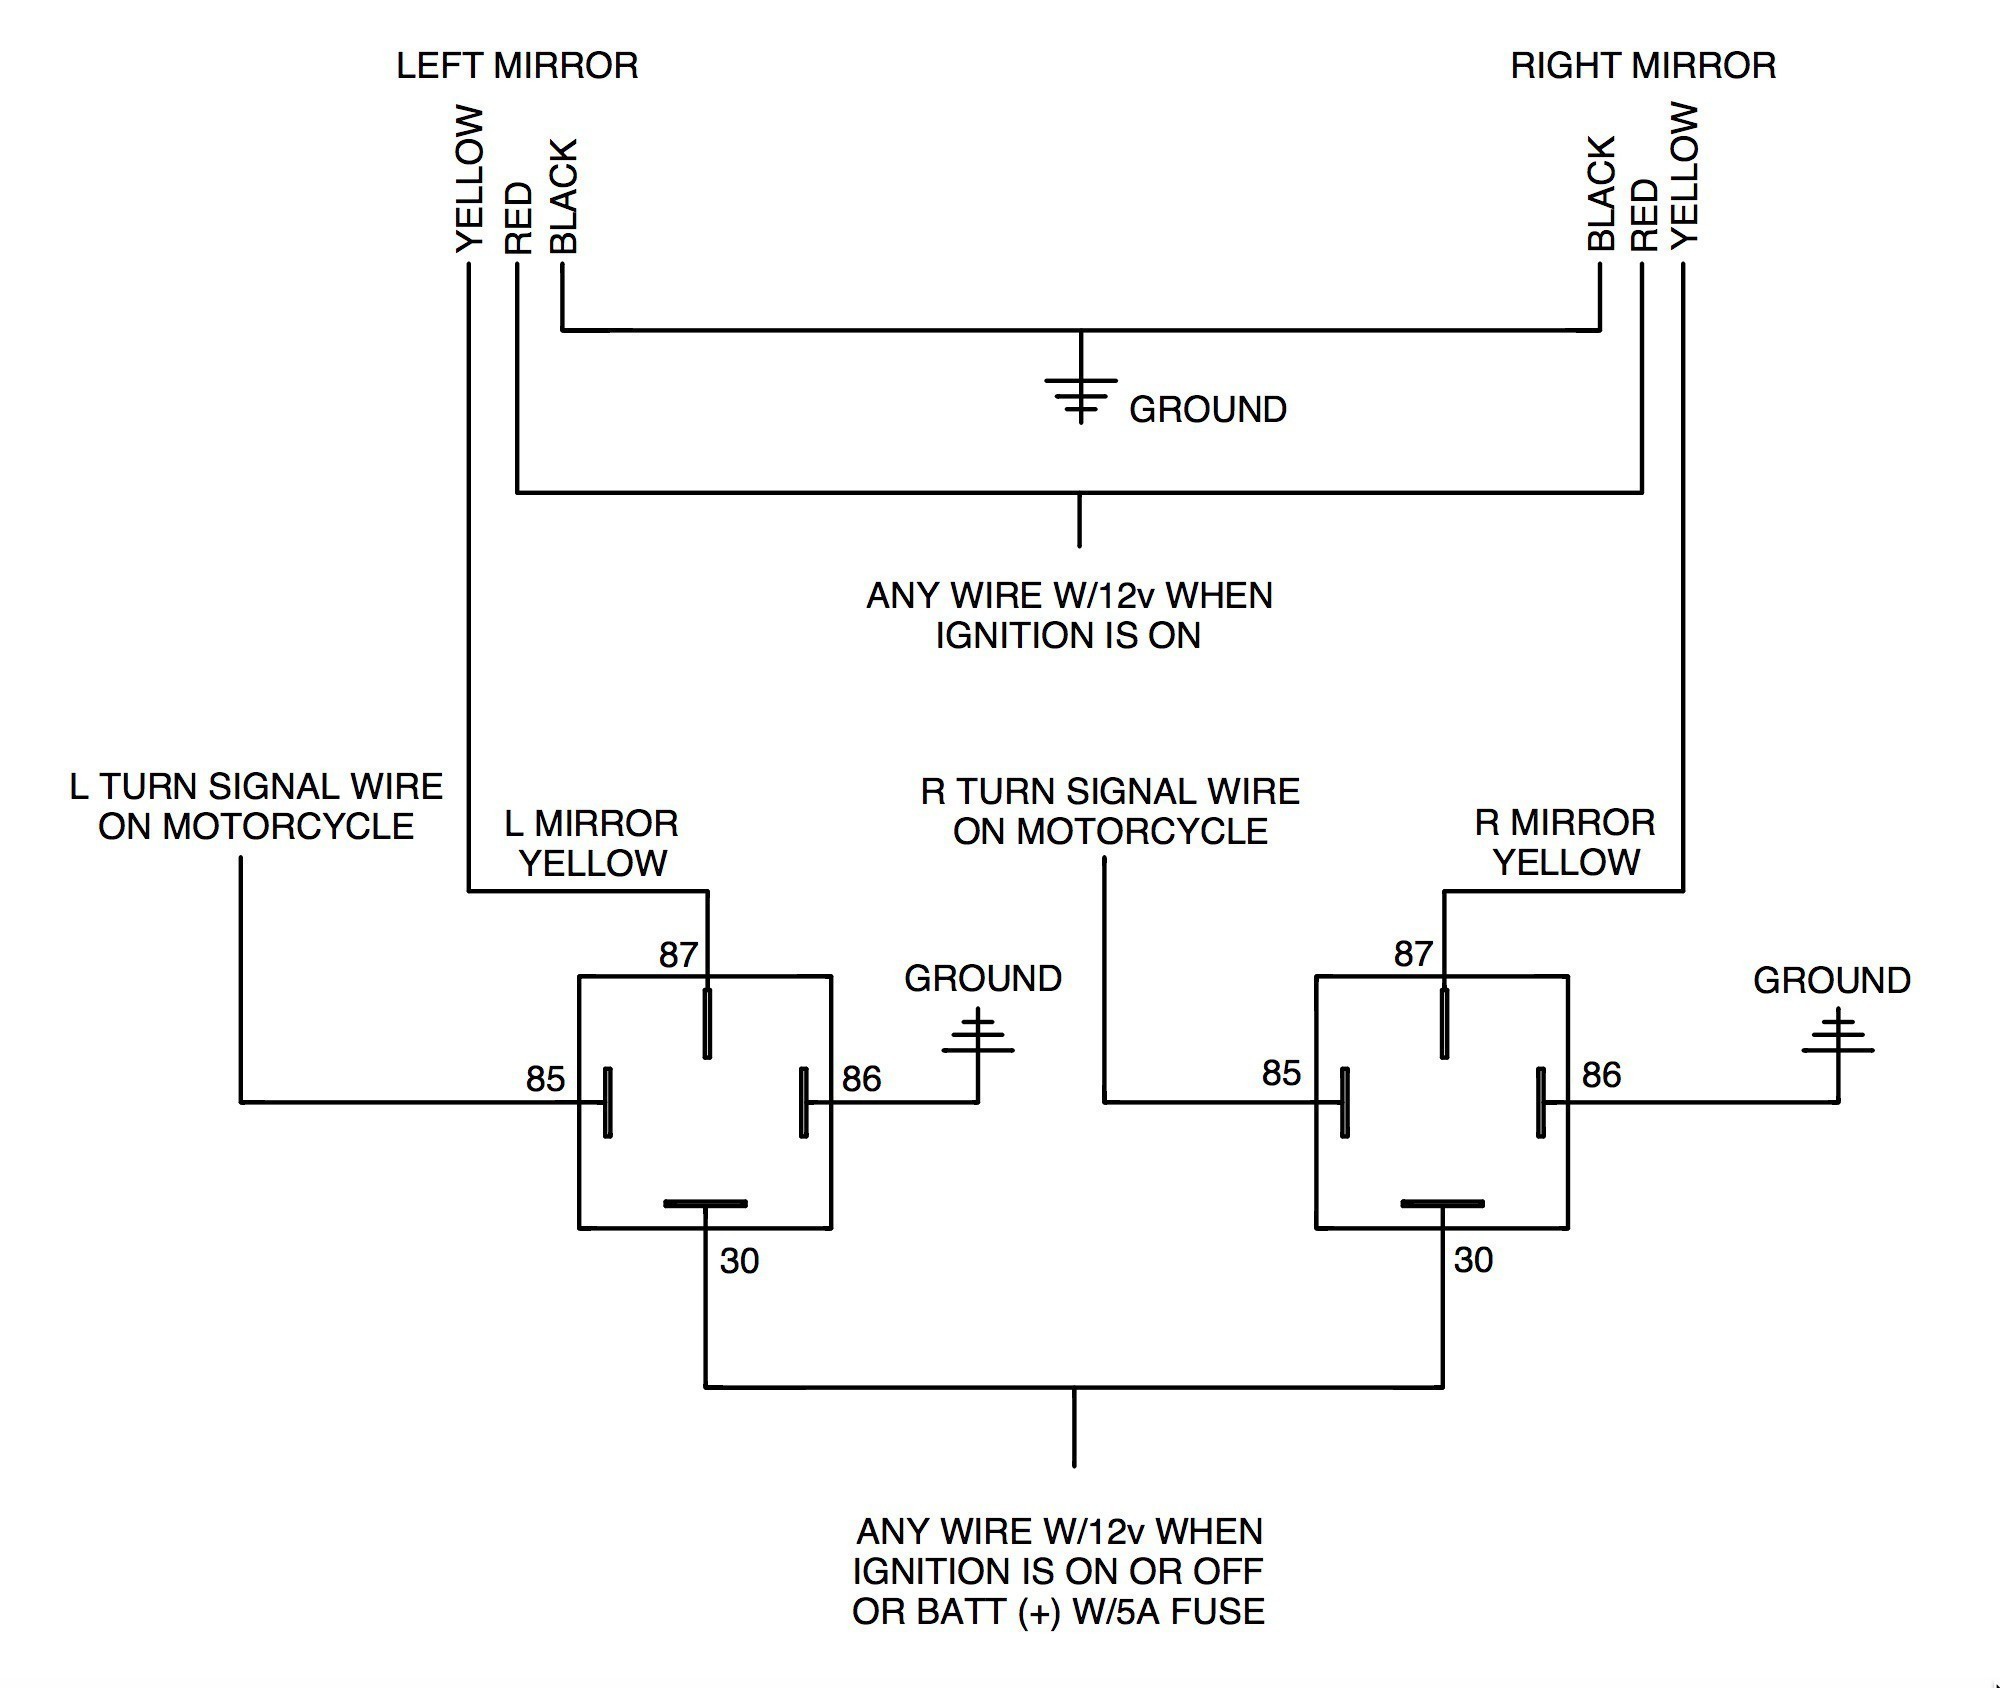 Wiring An Automotive Relay Diagram New Flasher Relay Diagram Turn Signal Wiring Diagram Turn Signal Wiring